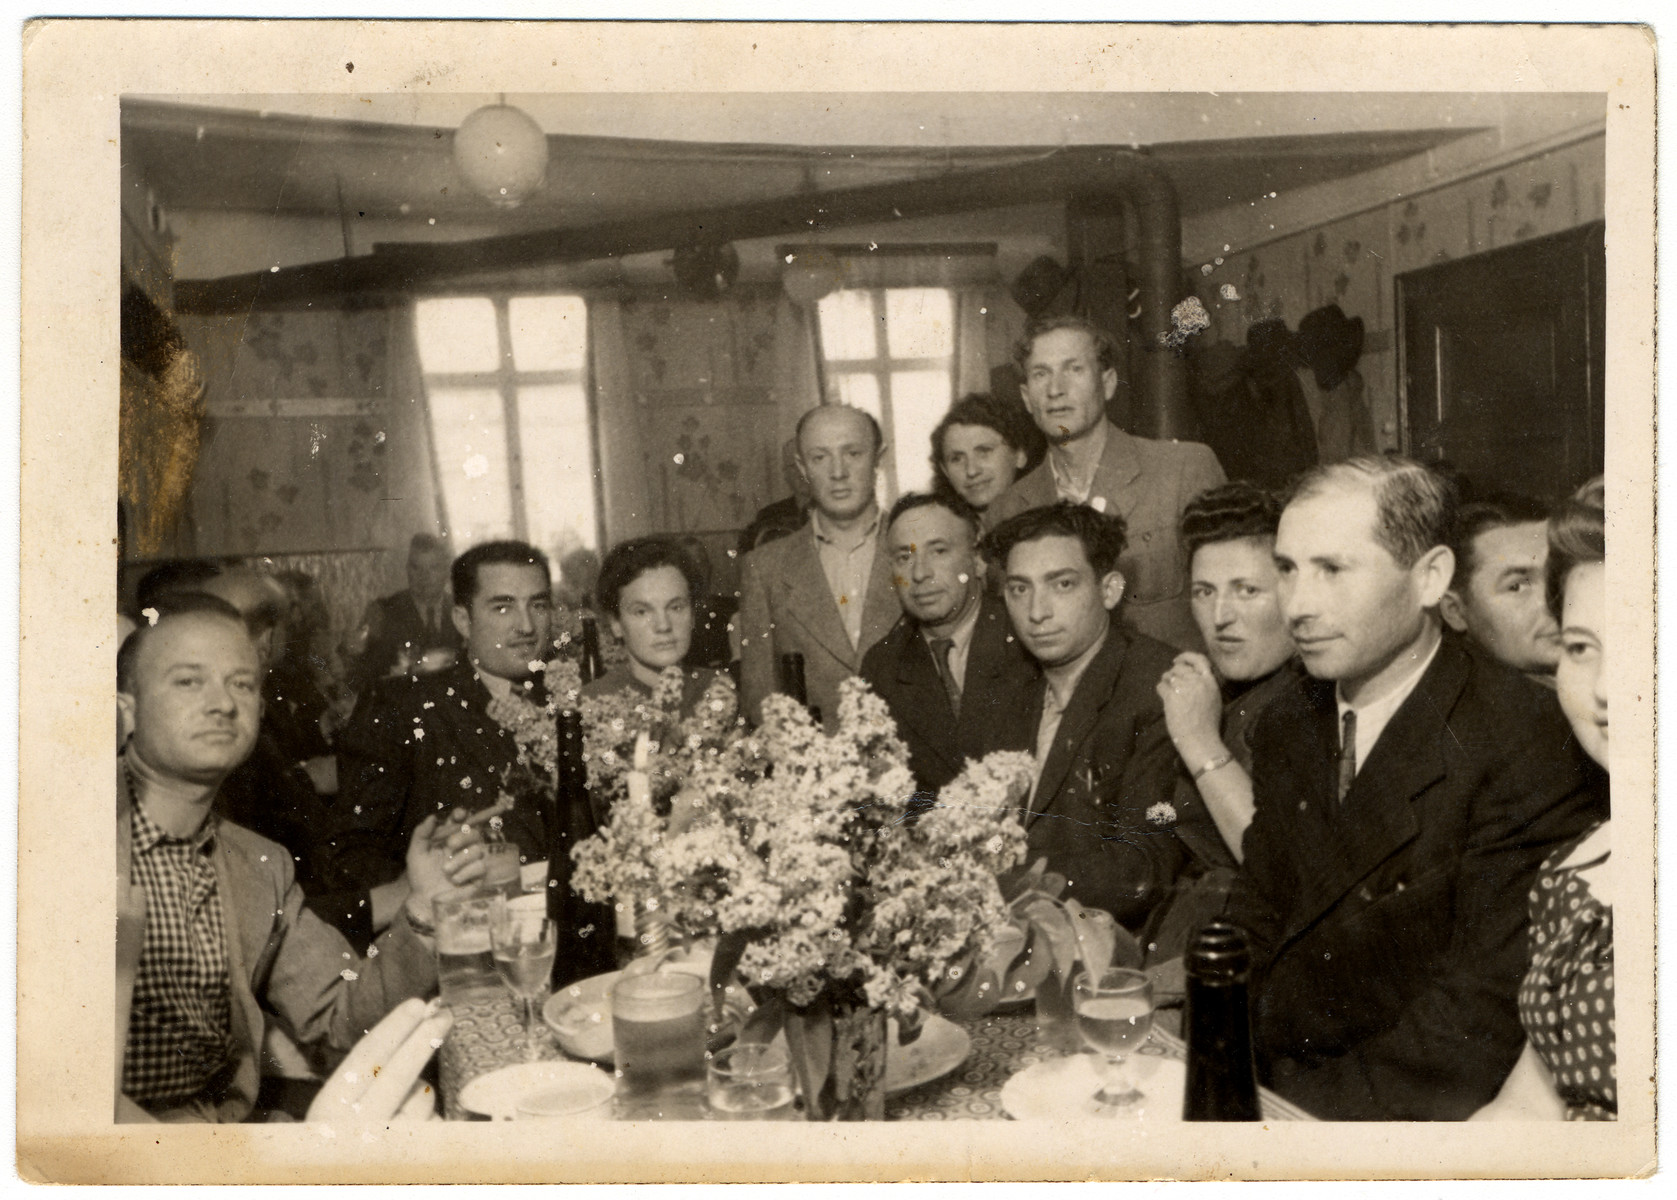 A group of displaced persons sits around a table in Zeilsheim following  a memorial service for victims of the Holocaust.

Roman Bol is pictured, standing in the back, on the right.  The man pictured second from the left has been identified as Leon Greenberg (later Green) of Gabin, Poland.